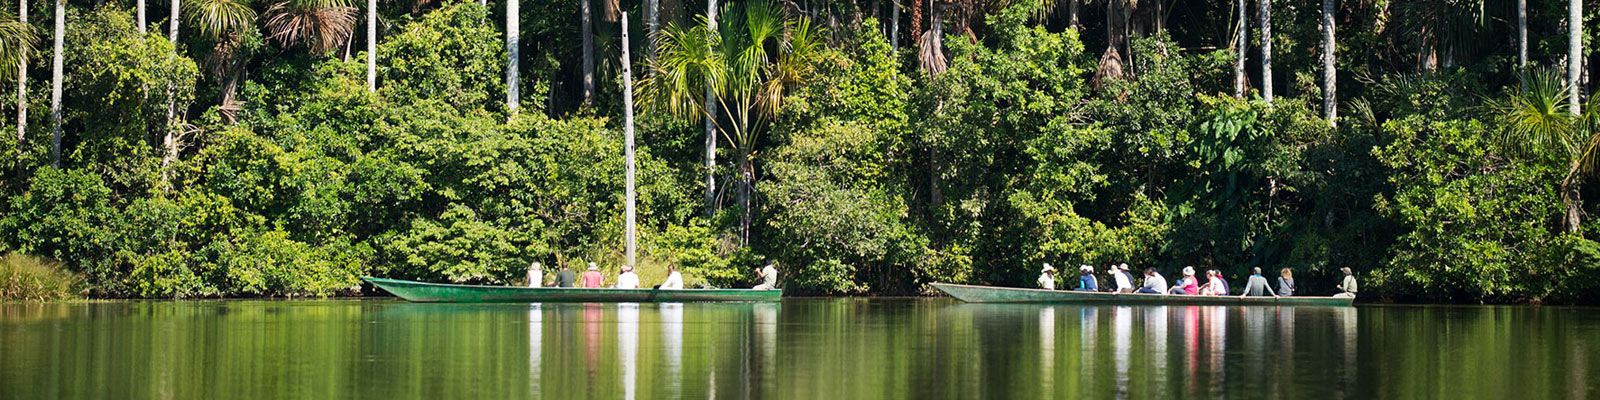 Culture & Aventure in Tambopata with Ecolucerna Lodge 3 Days / 2 Nights